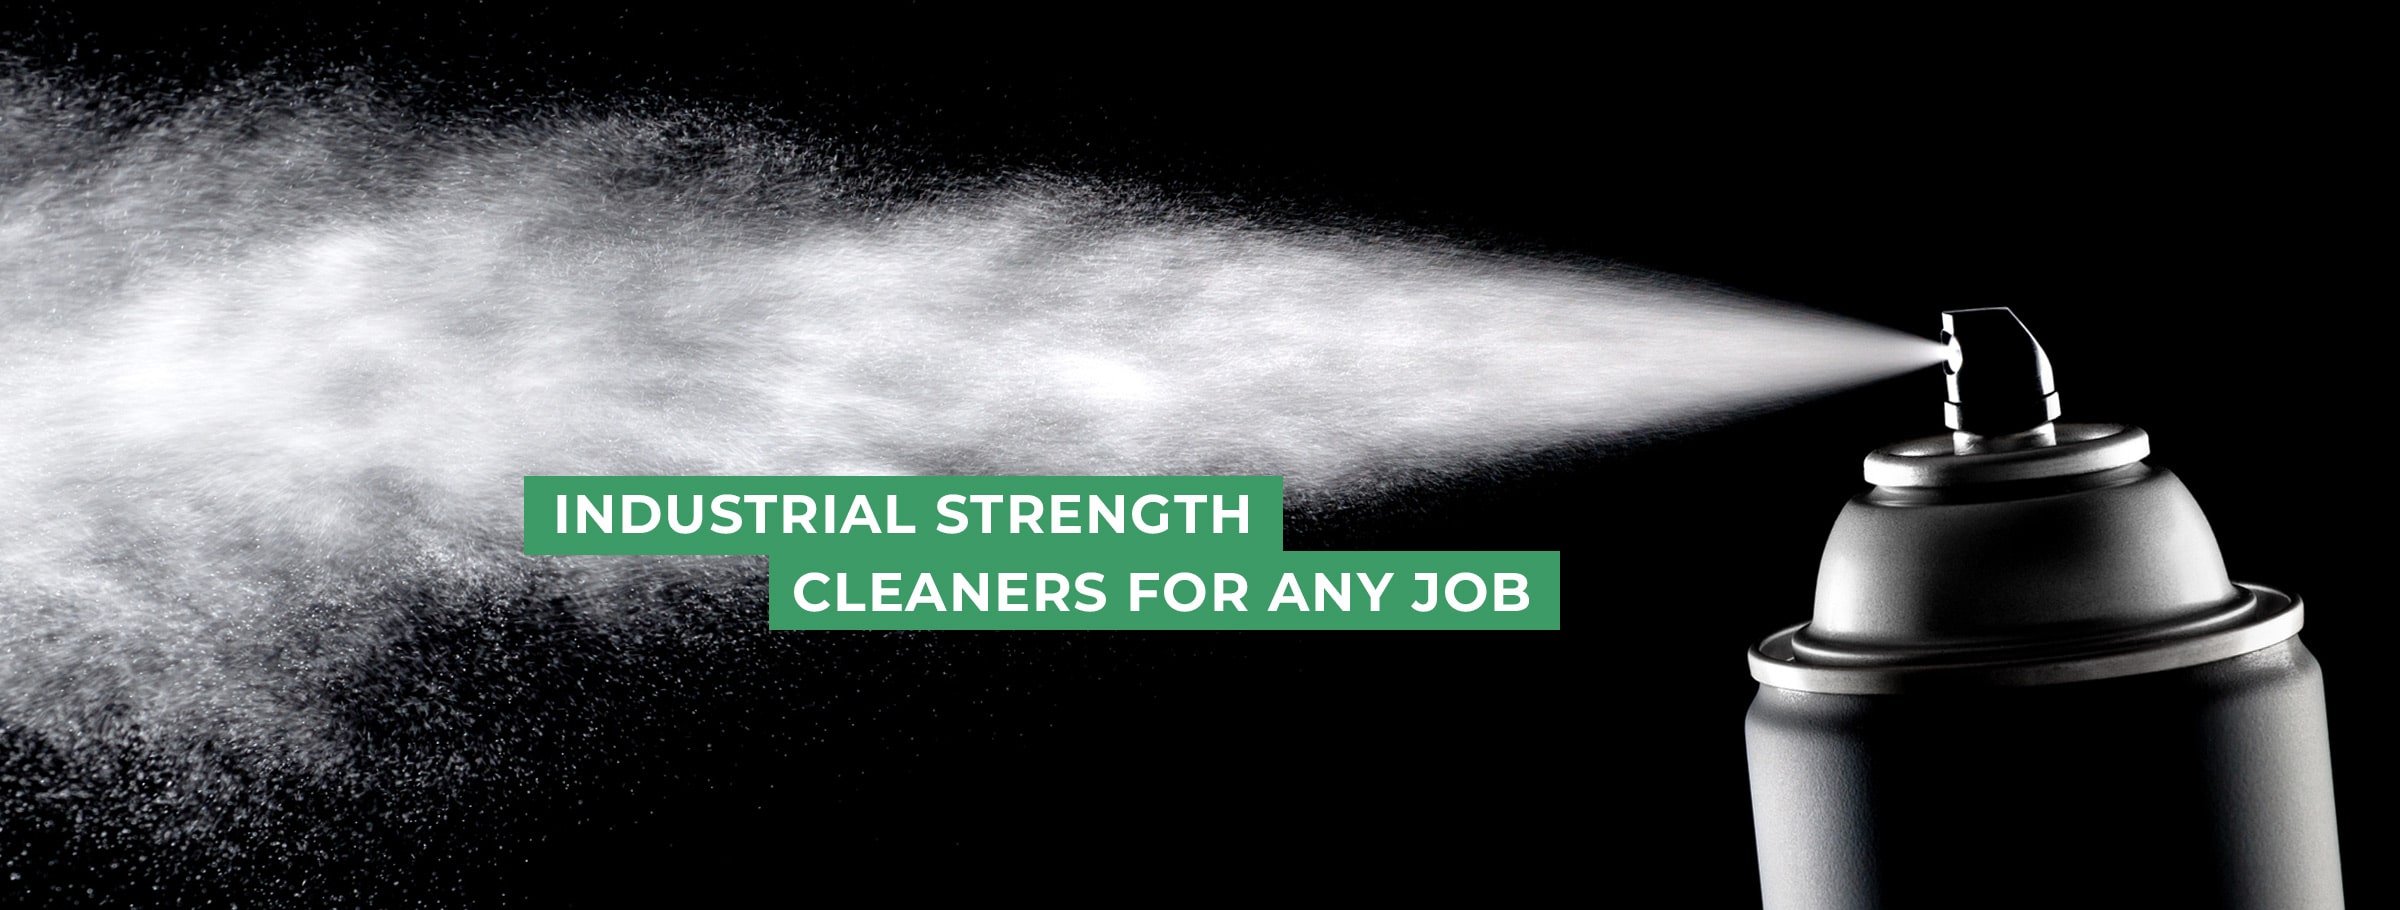 Industrial strength cleaners for any job